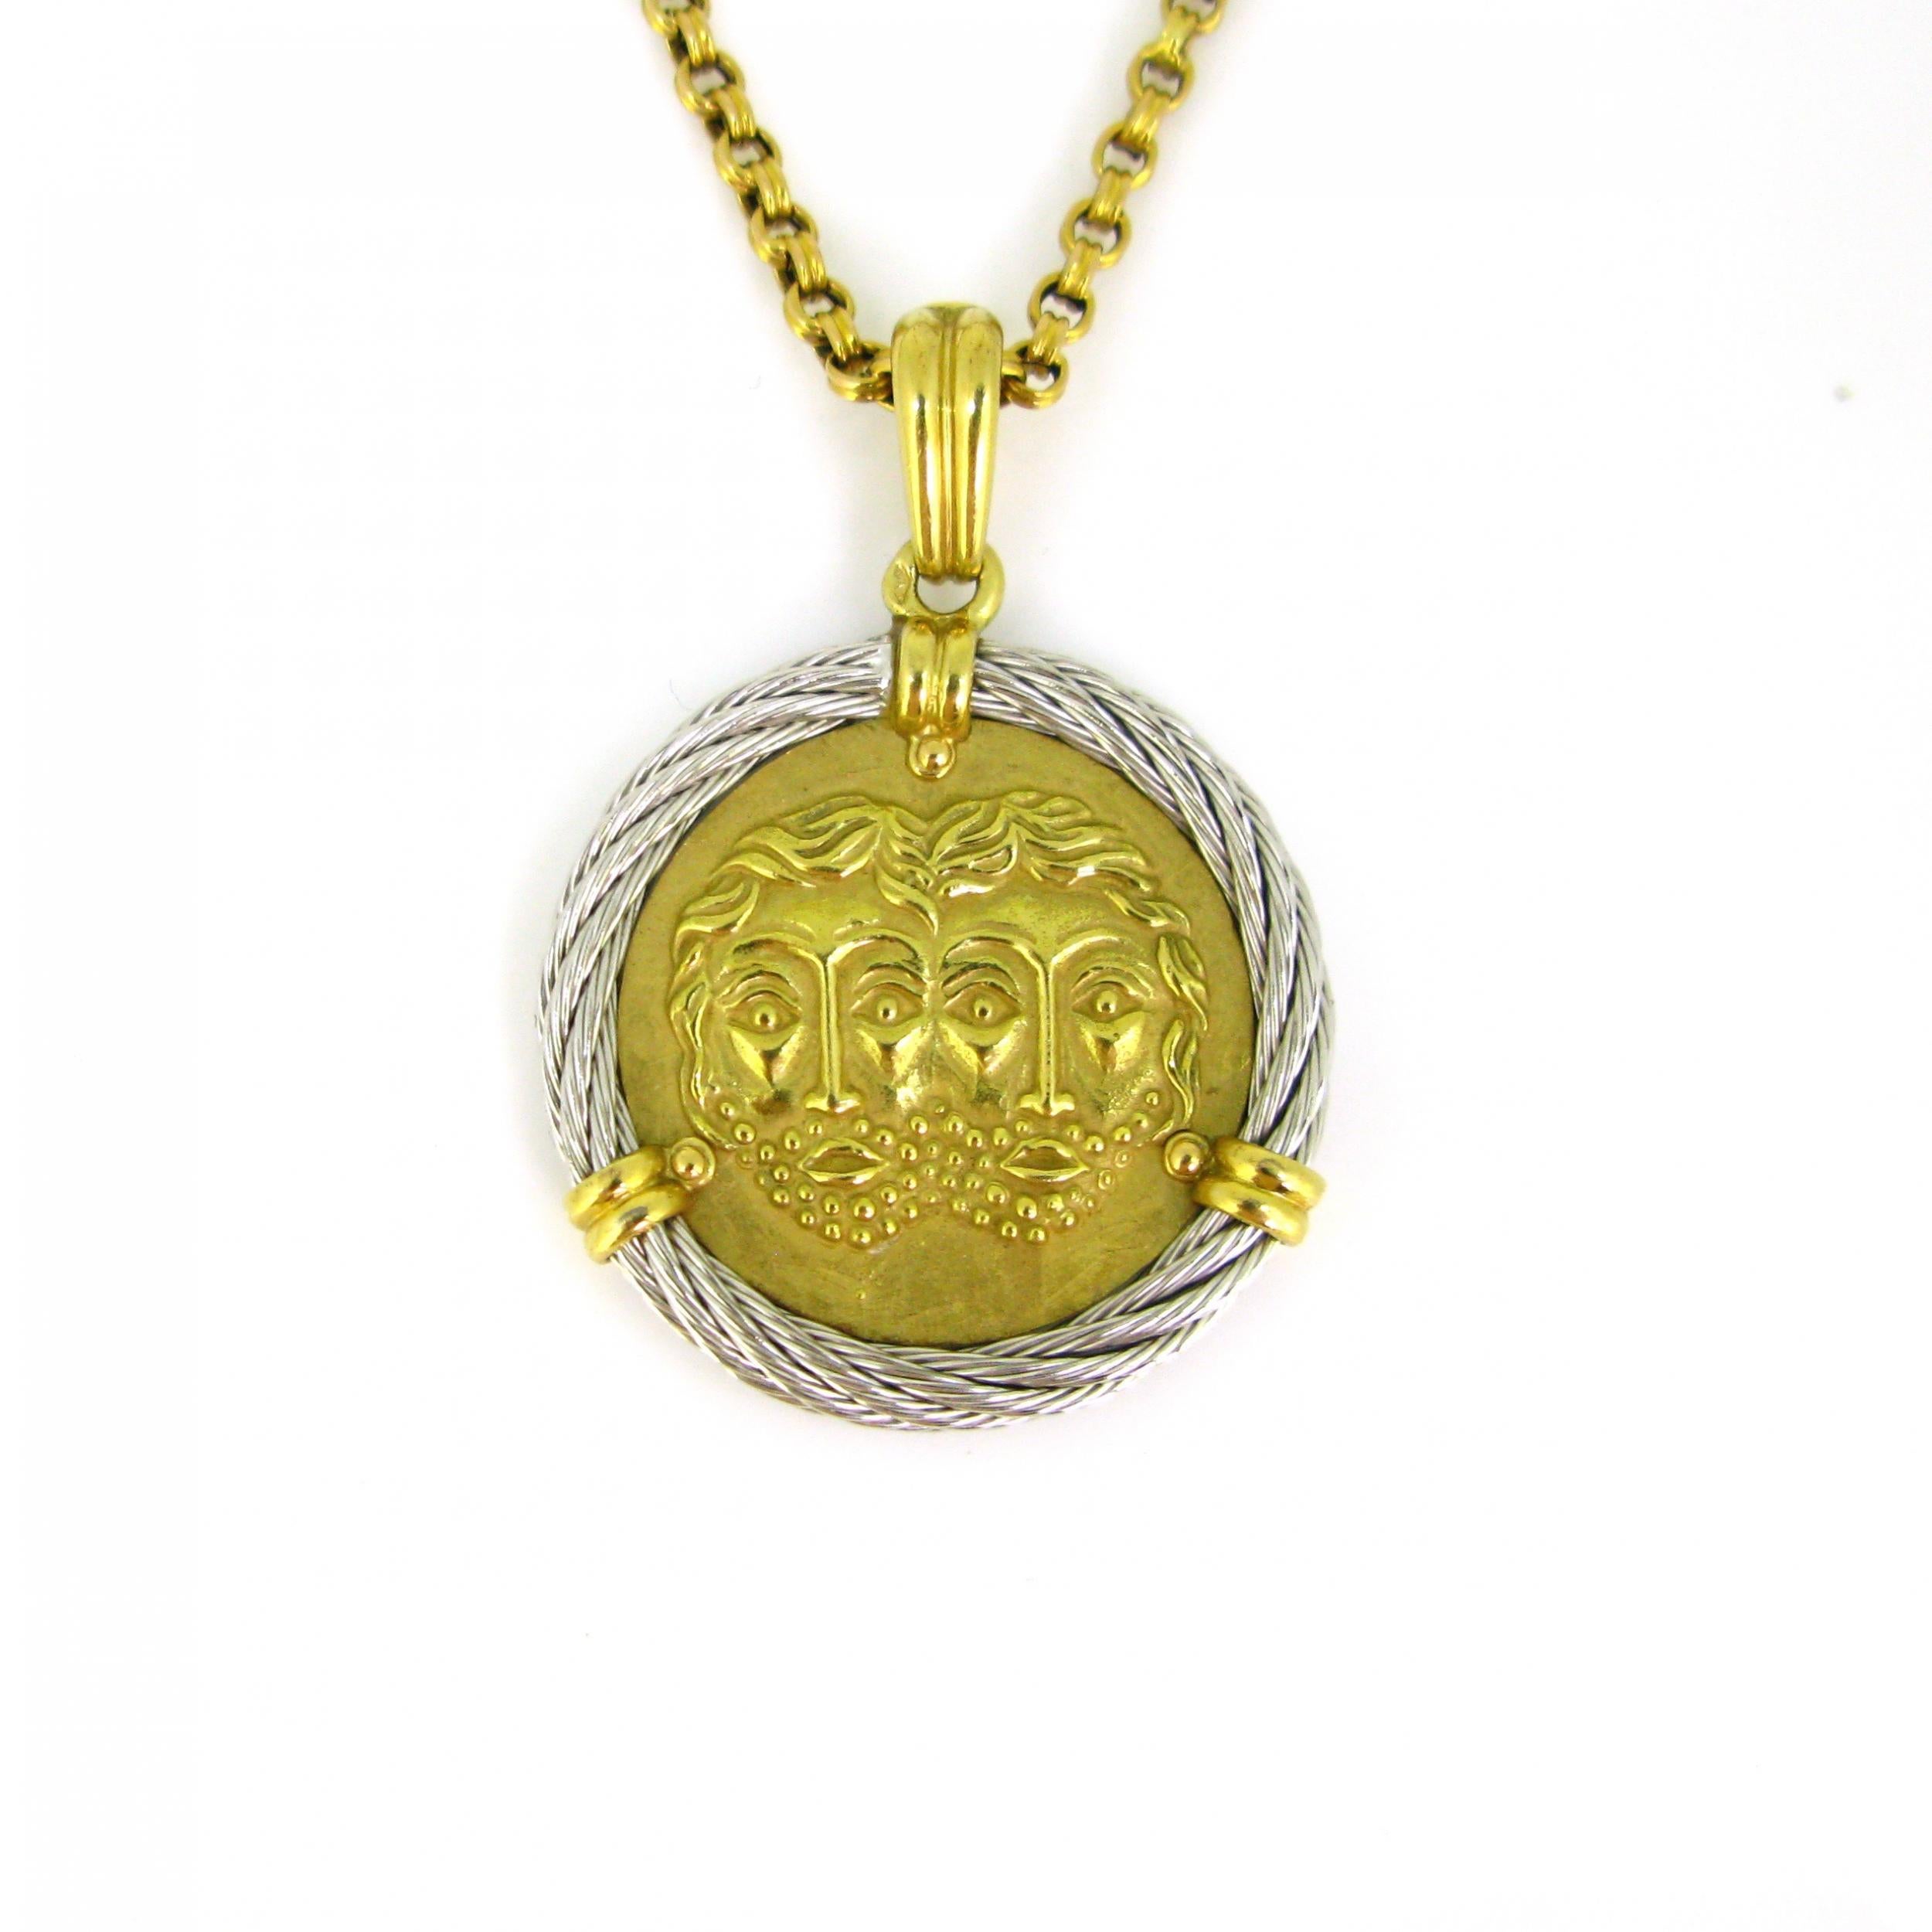 Fred Paris Force 10 Gemini Zodiac Pendant, 18kt Yellow Gold and Steel 1